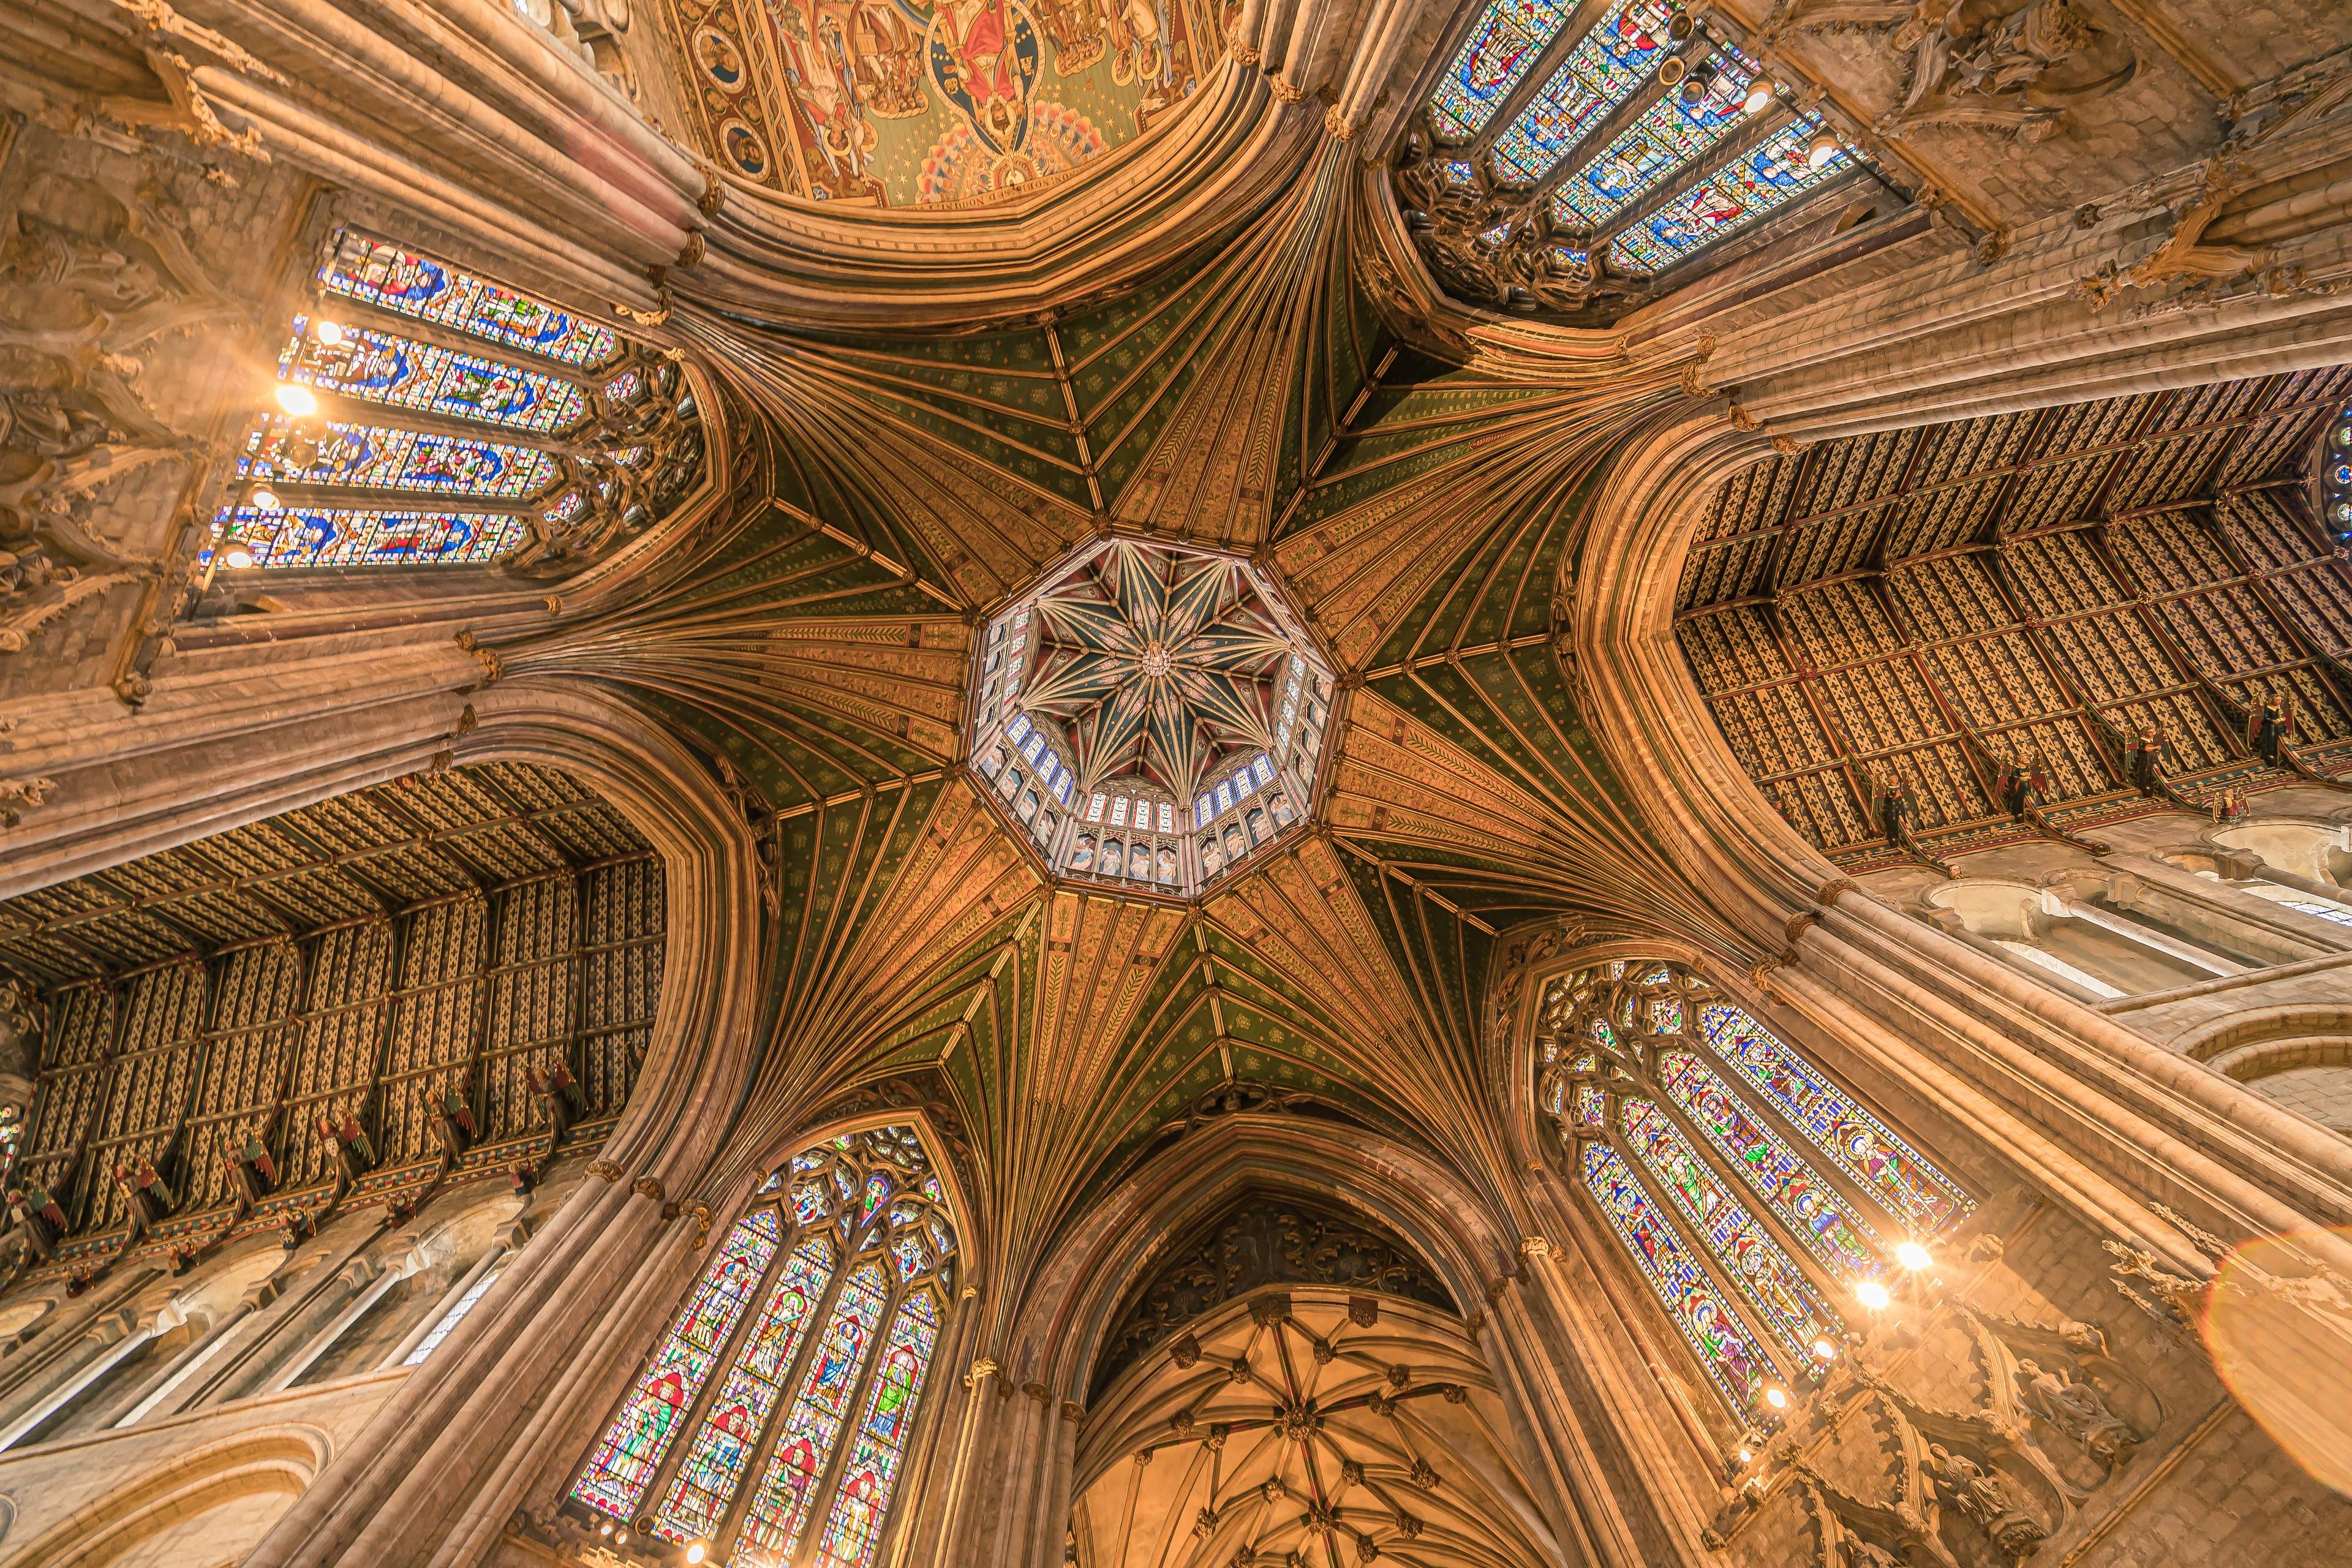 The Octagon of Ely Cathedral, Ely, Cambridgeshire, UK